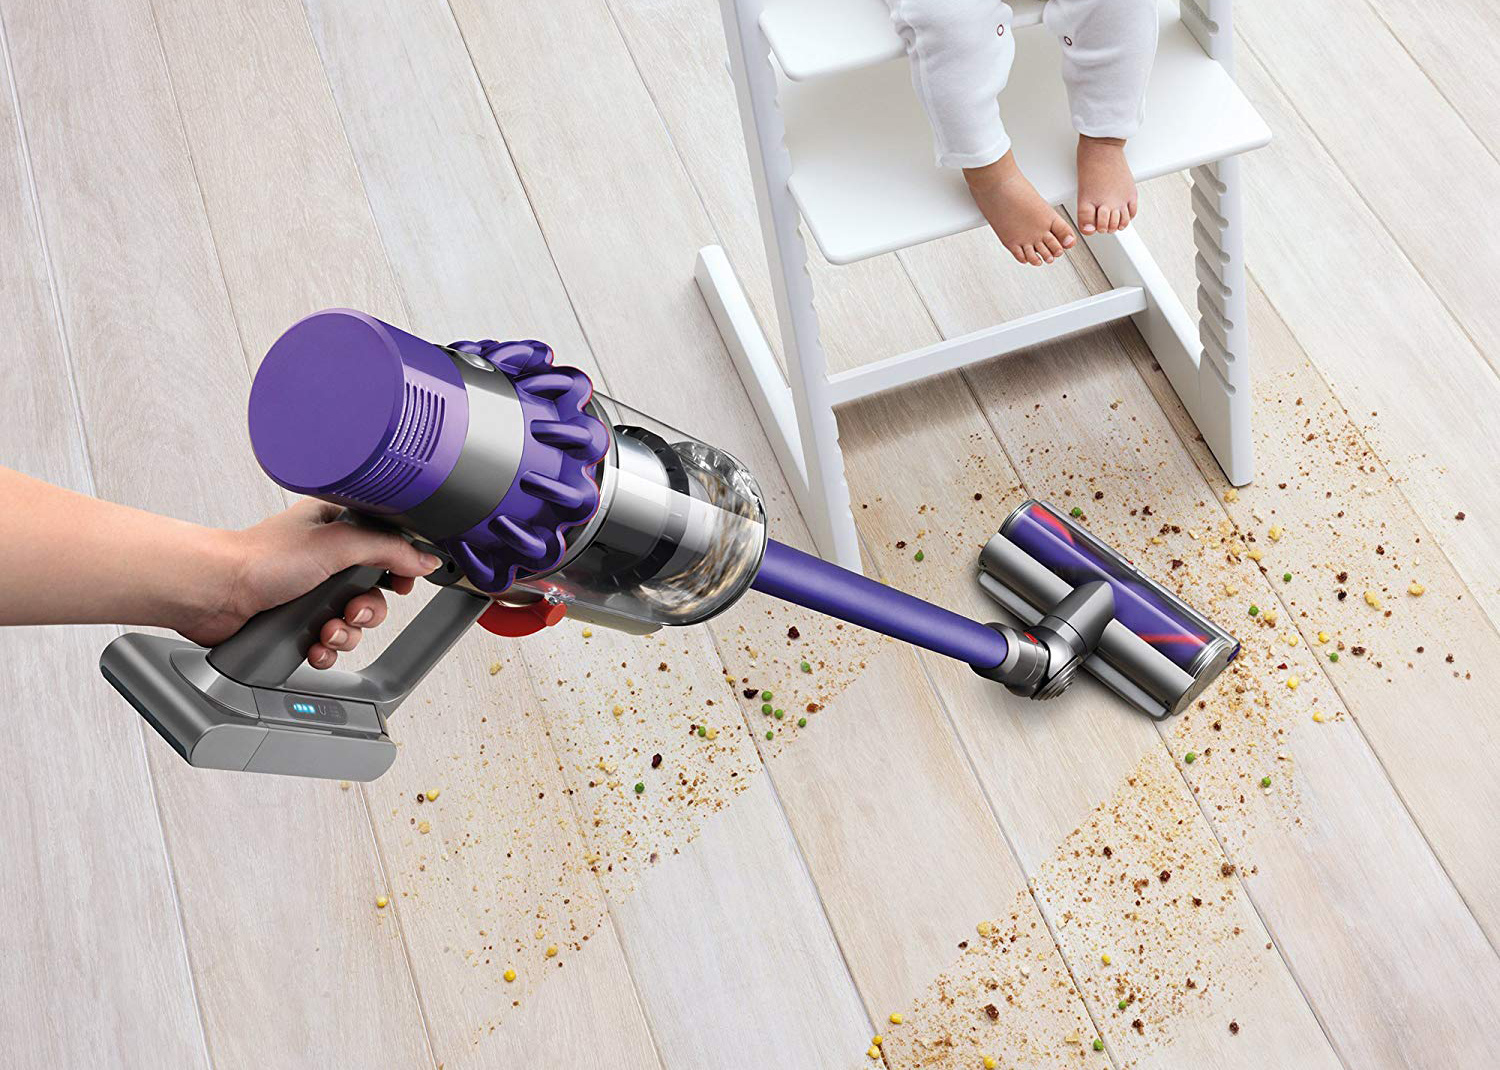 The common silimarity in Greenworks and Dyson stick vacuum